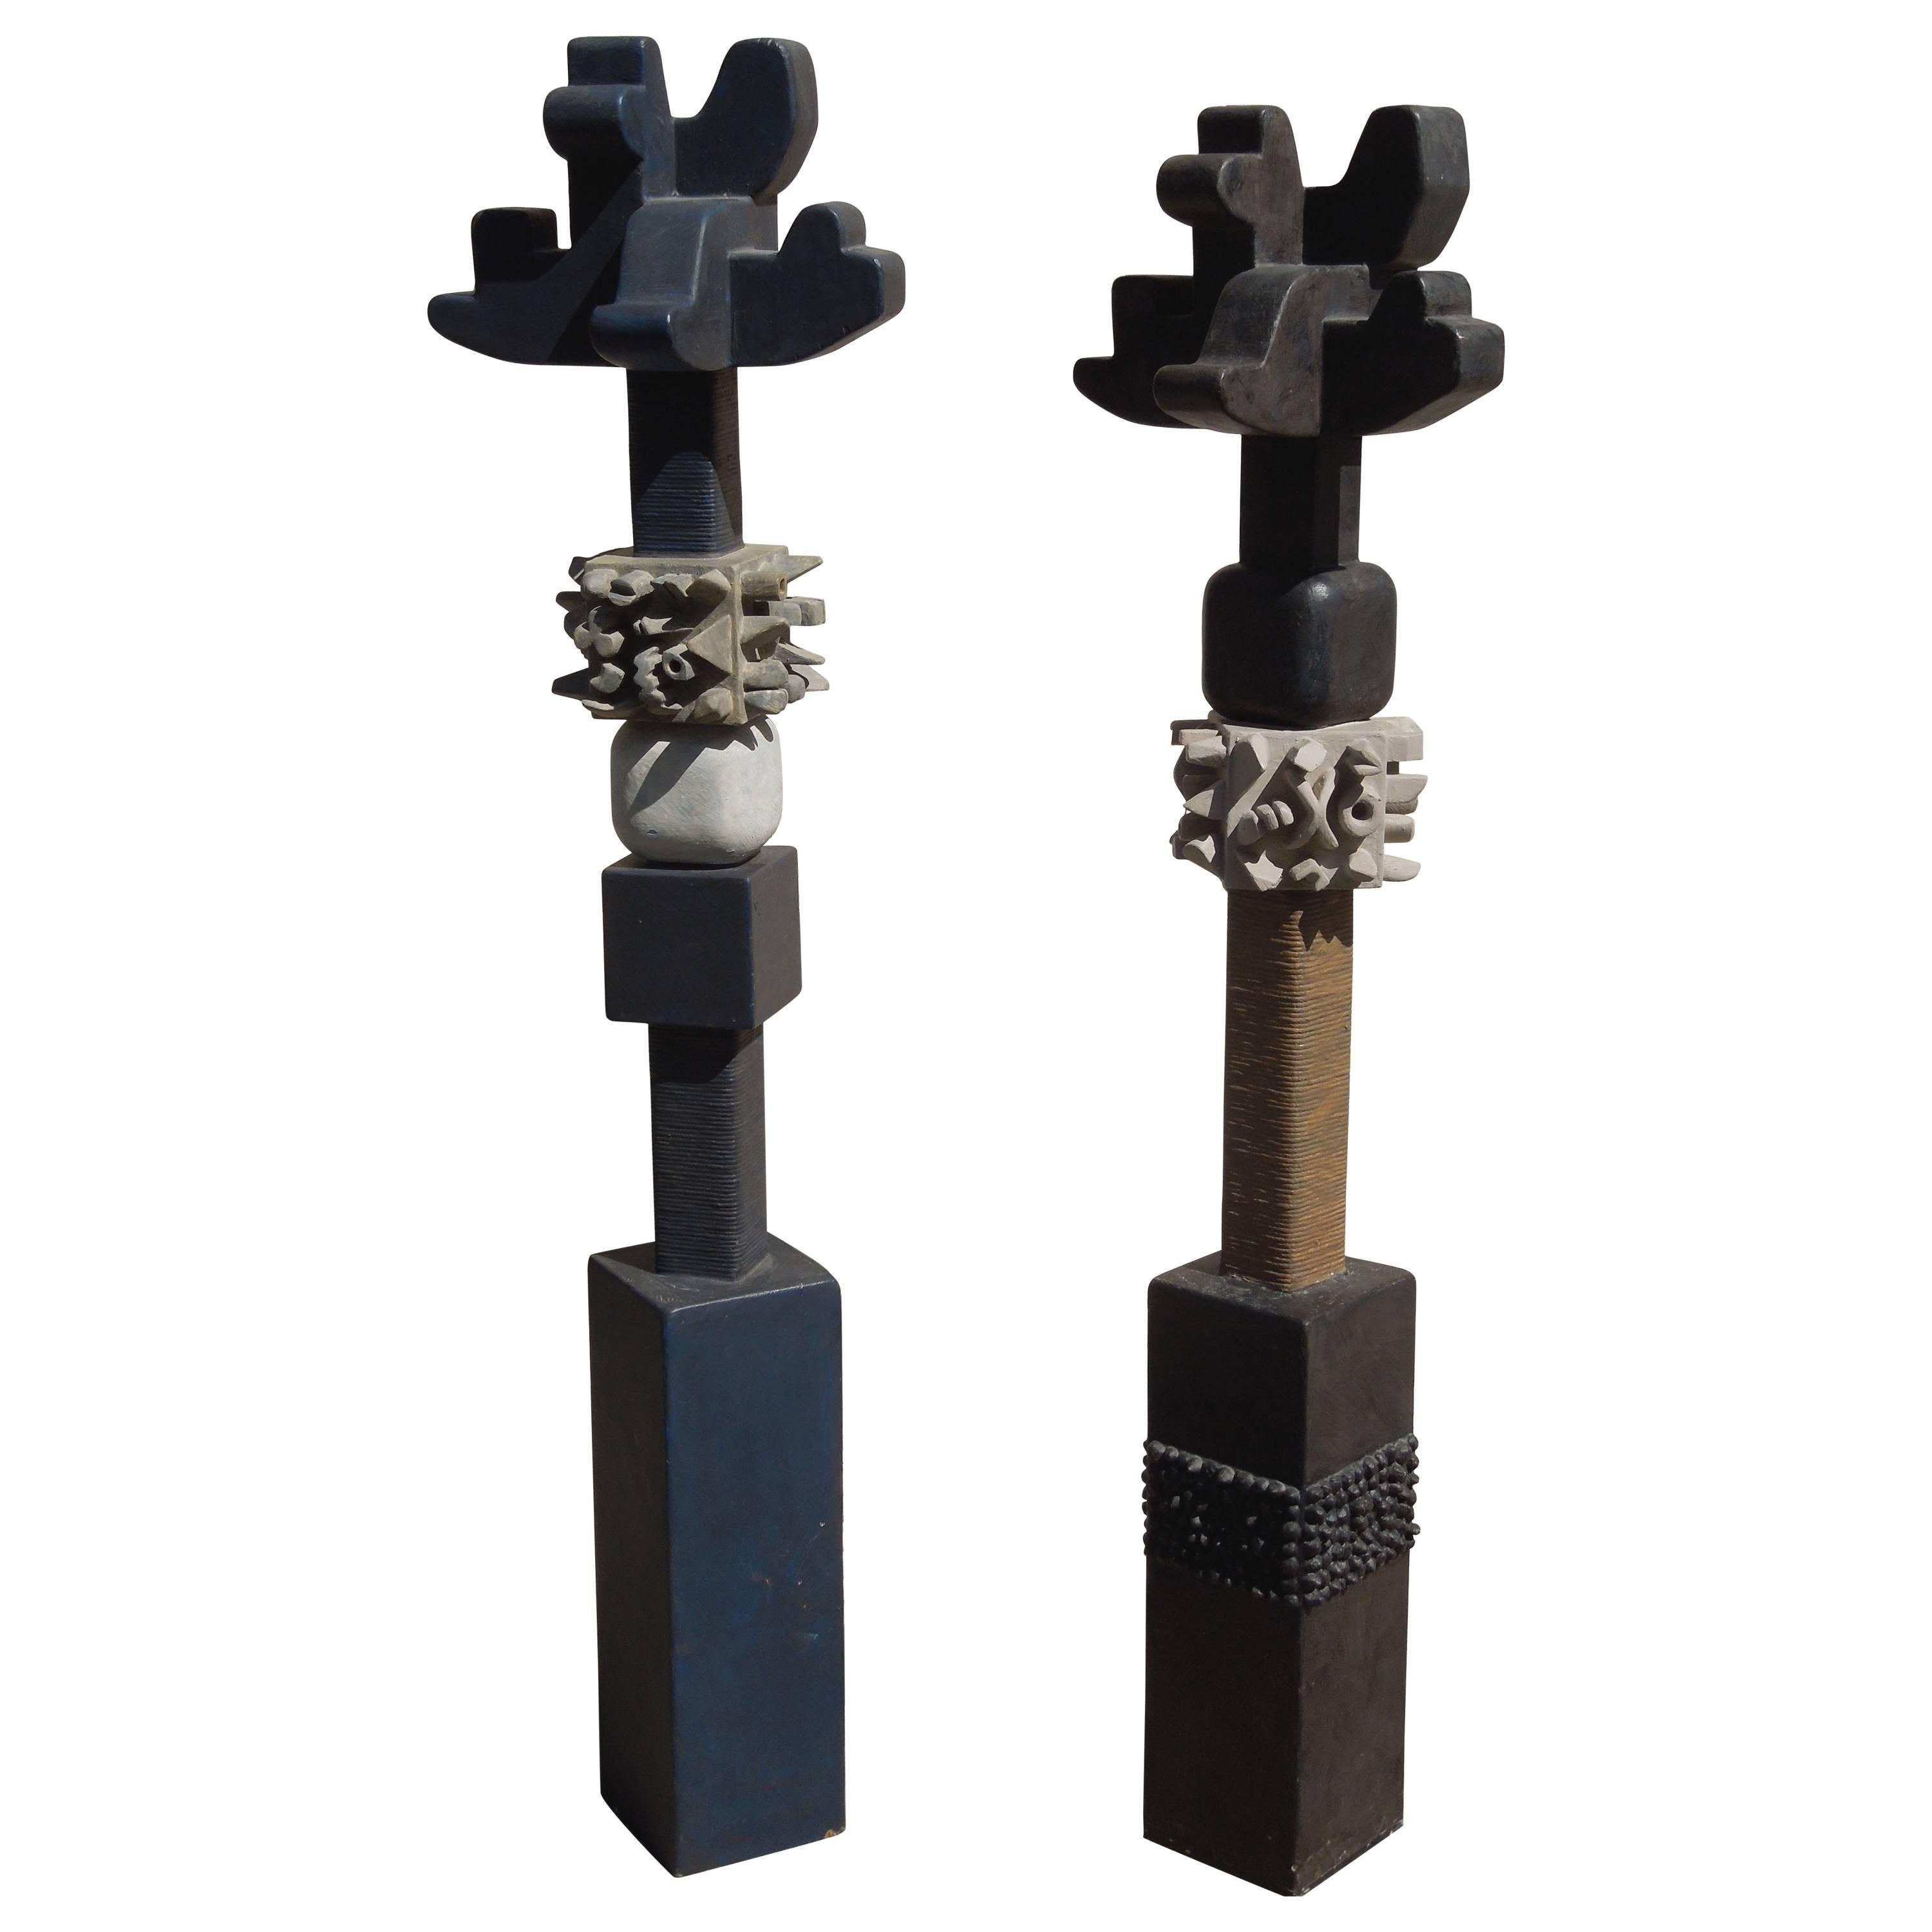 Pair of Rare Andy Nelson Modern Art Wood TOTEM Sculptures from Artist's Estate